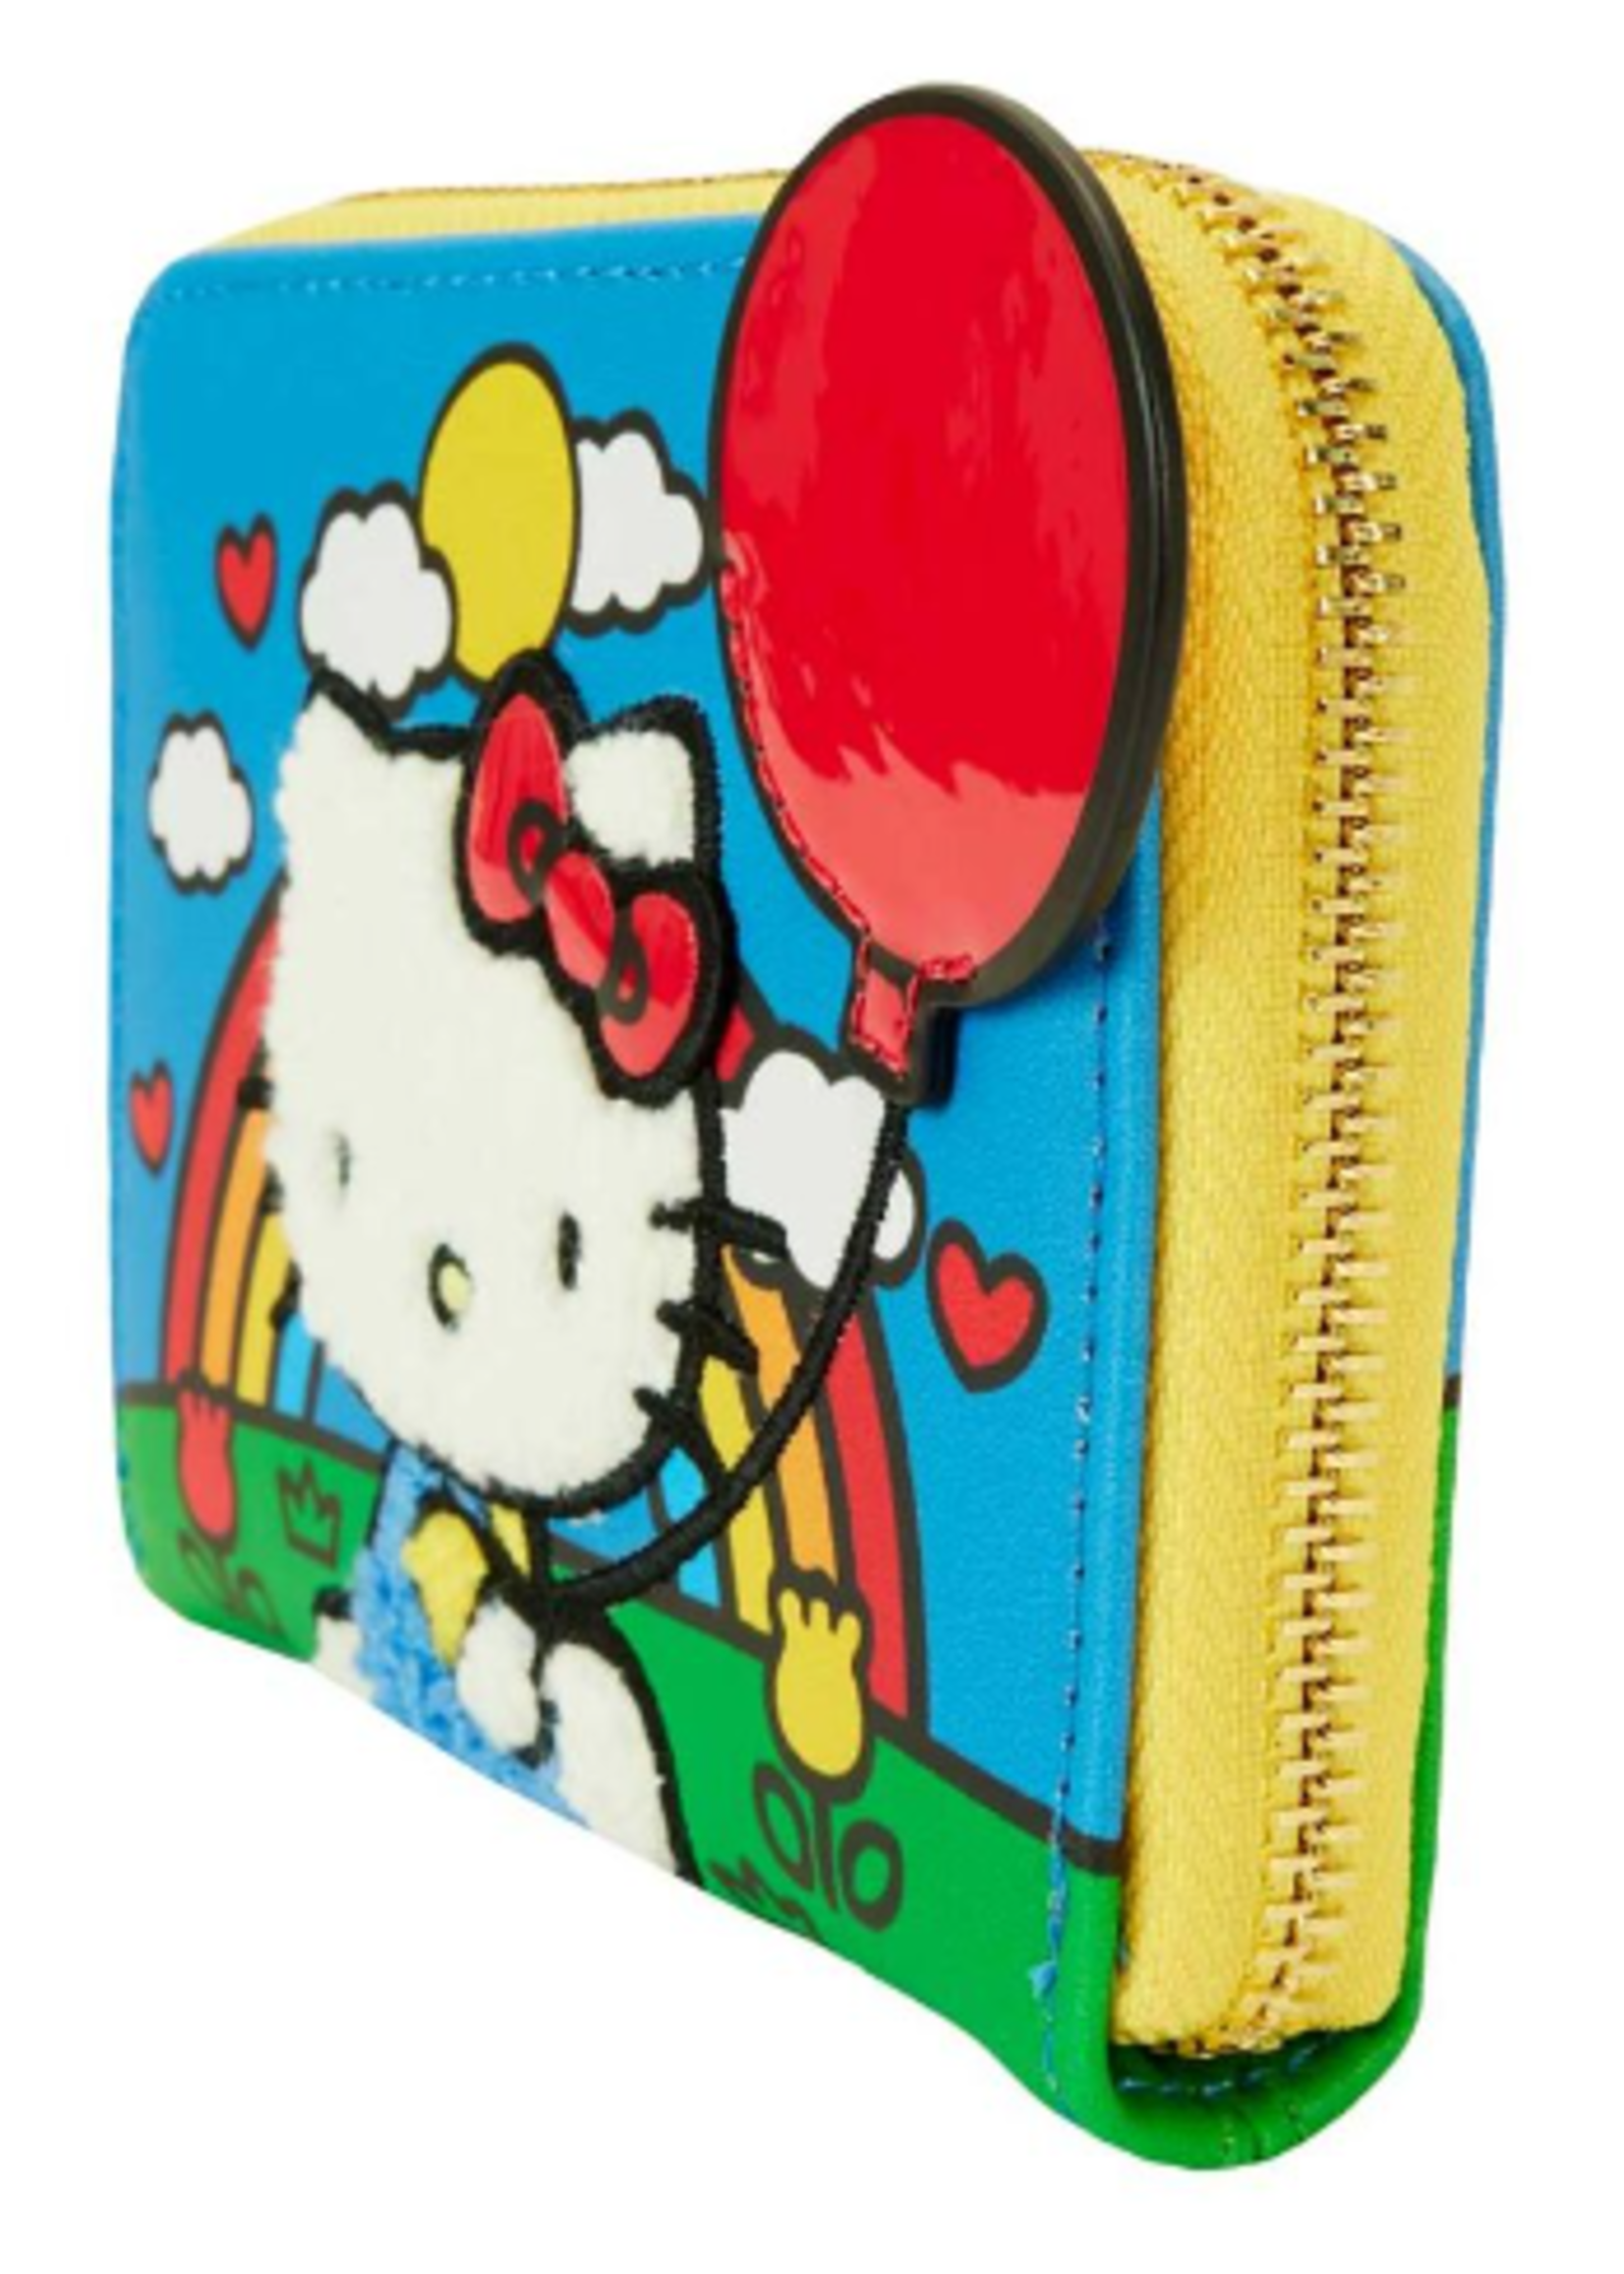 Loungefly LOUNGEFLY SANRIO HELLO KITTY 50TH ANN WALLET